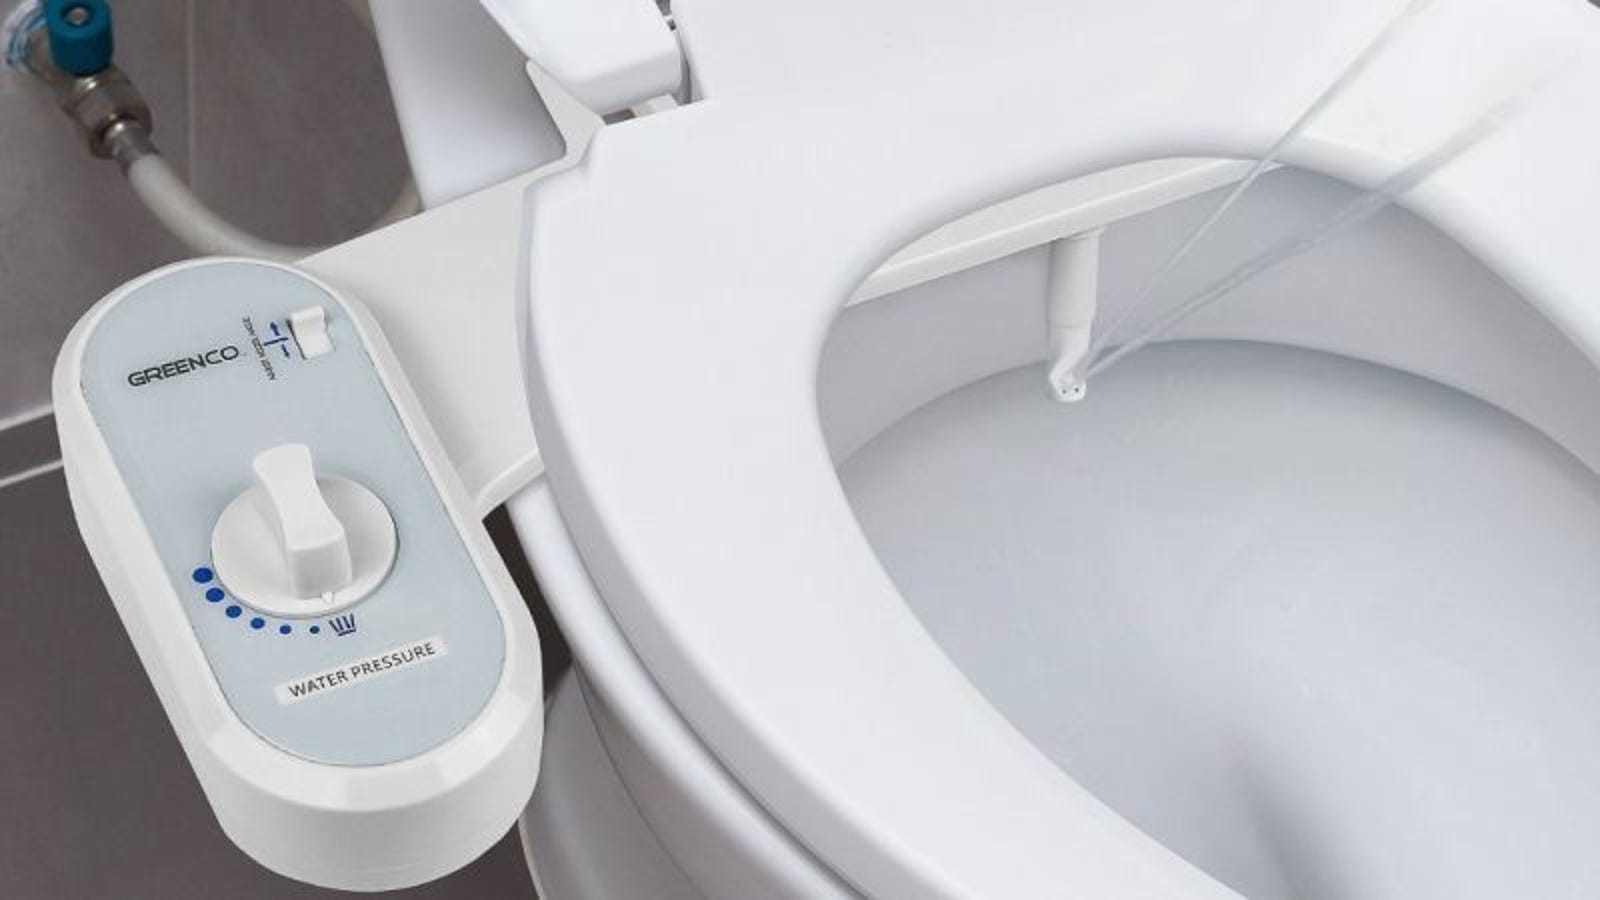 Add A Bidet To Your Existing Toilet For